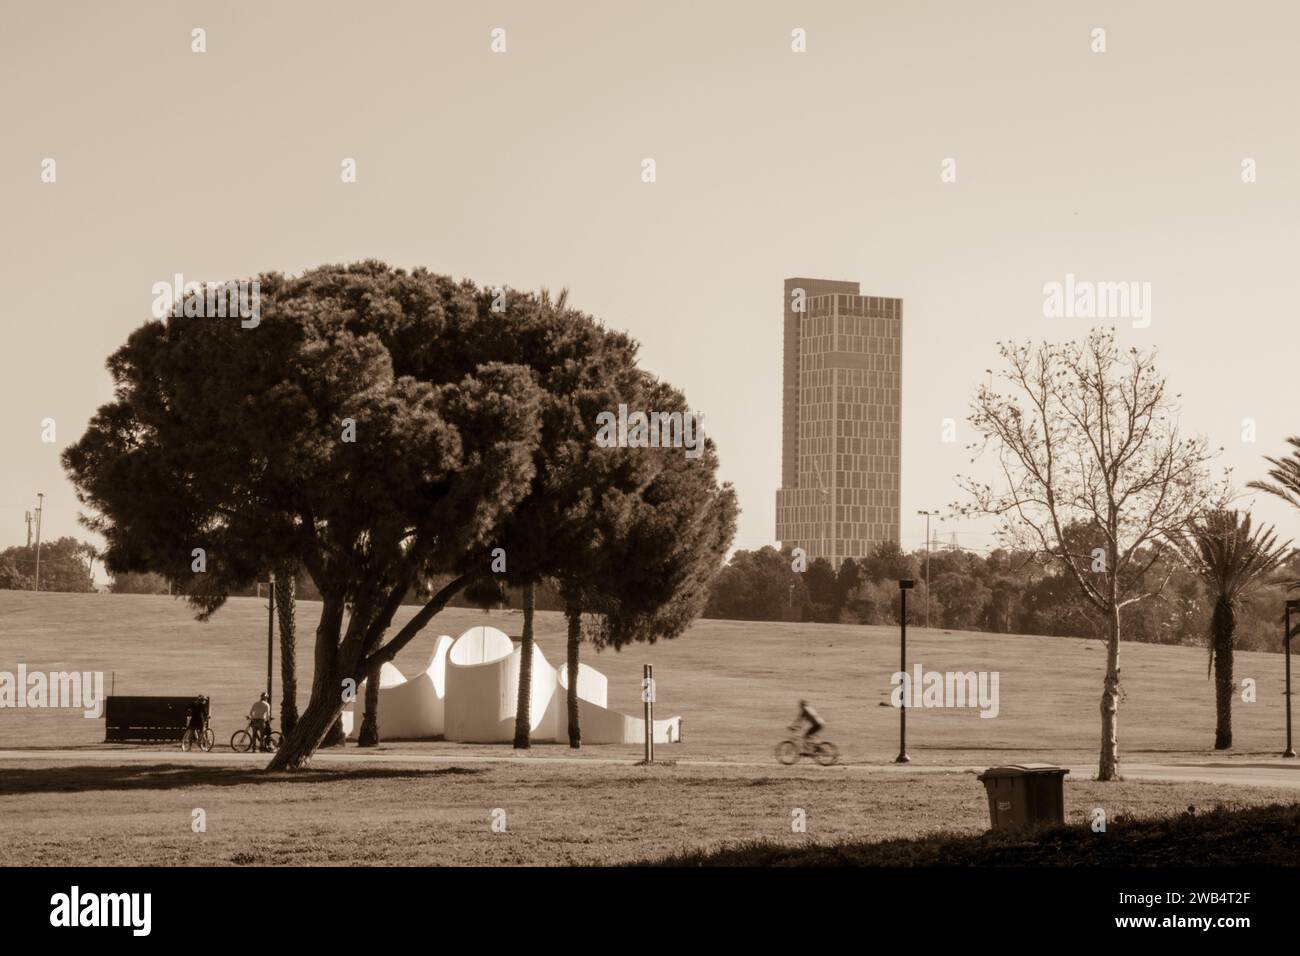 A large park in the city center with wide green lawns, bike ,walking and jogging paths. In the background are the office towers of the city. Stock Photo